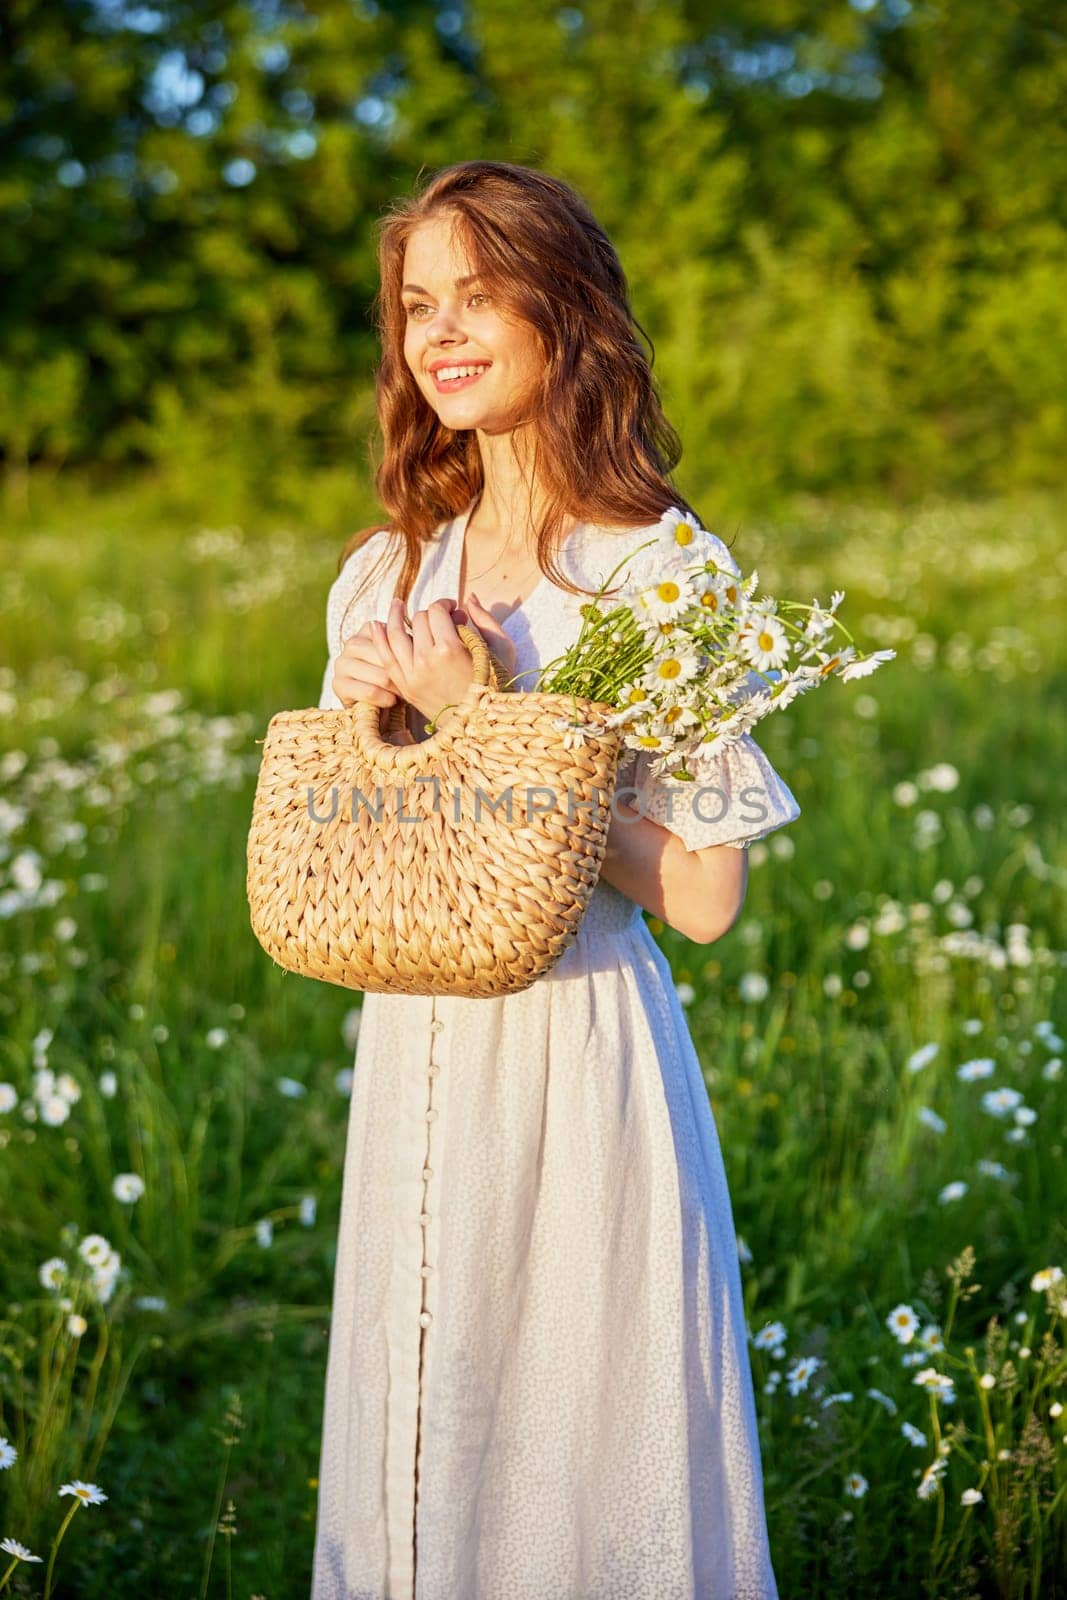 beautiful woman laughing in nature in a chamomile field holding a wicker basket in her hands by Vichizh